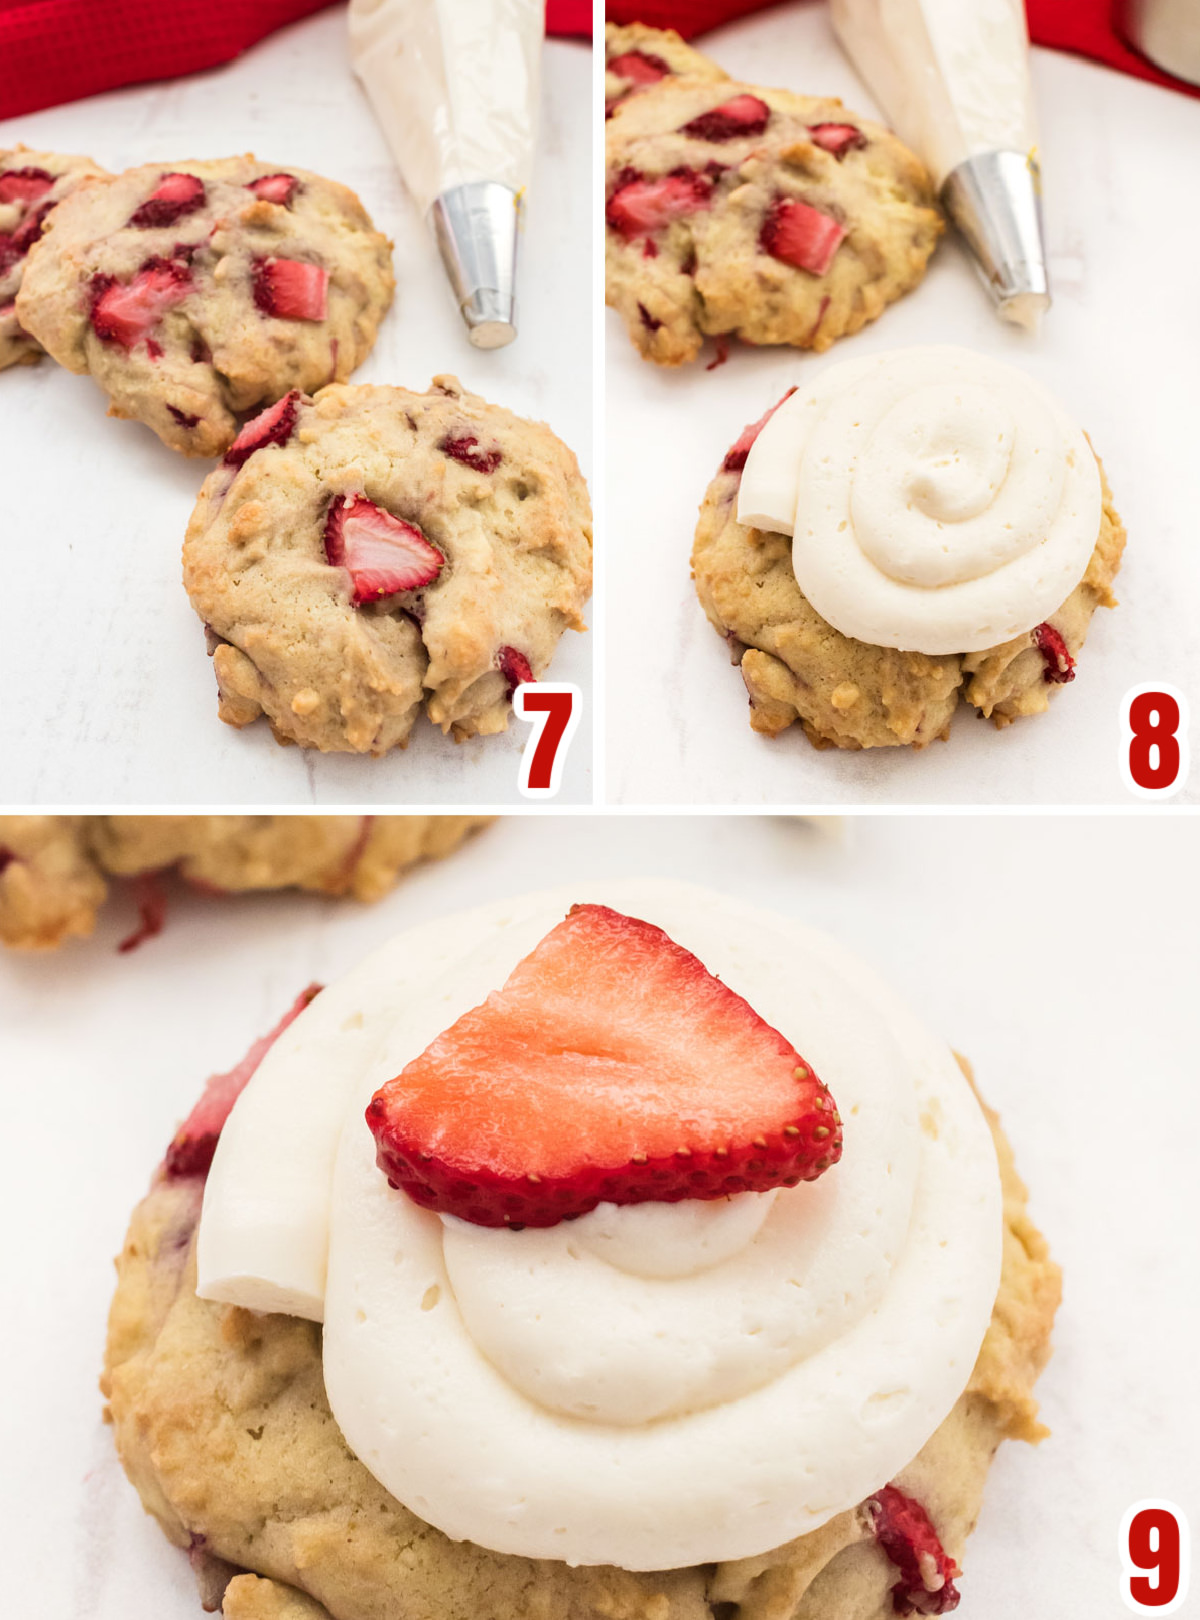 Collage image showing how to frost the Strawberry Shortcake Cookies with the Whipped Buttercream Frosting.